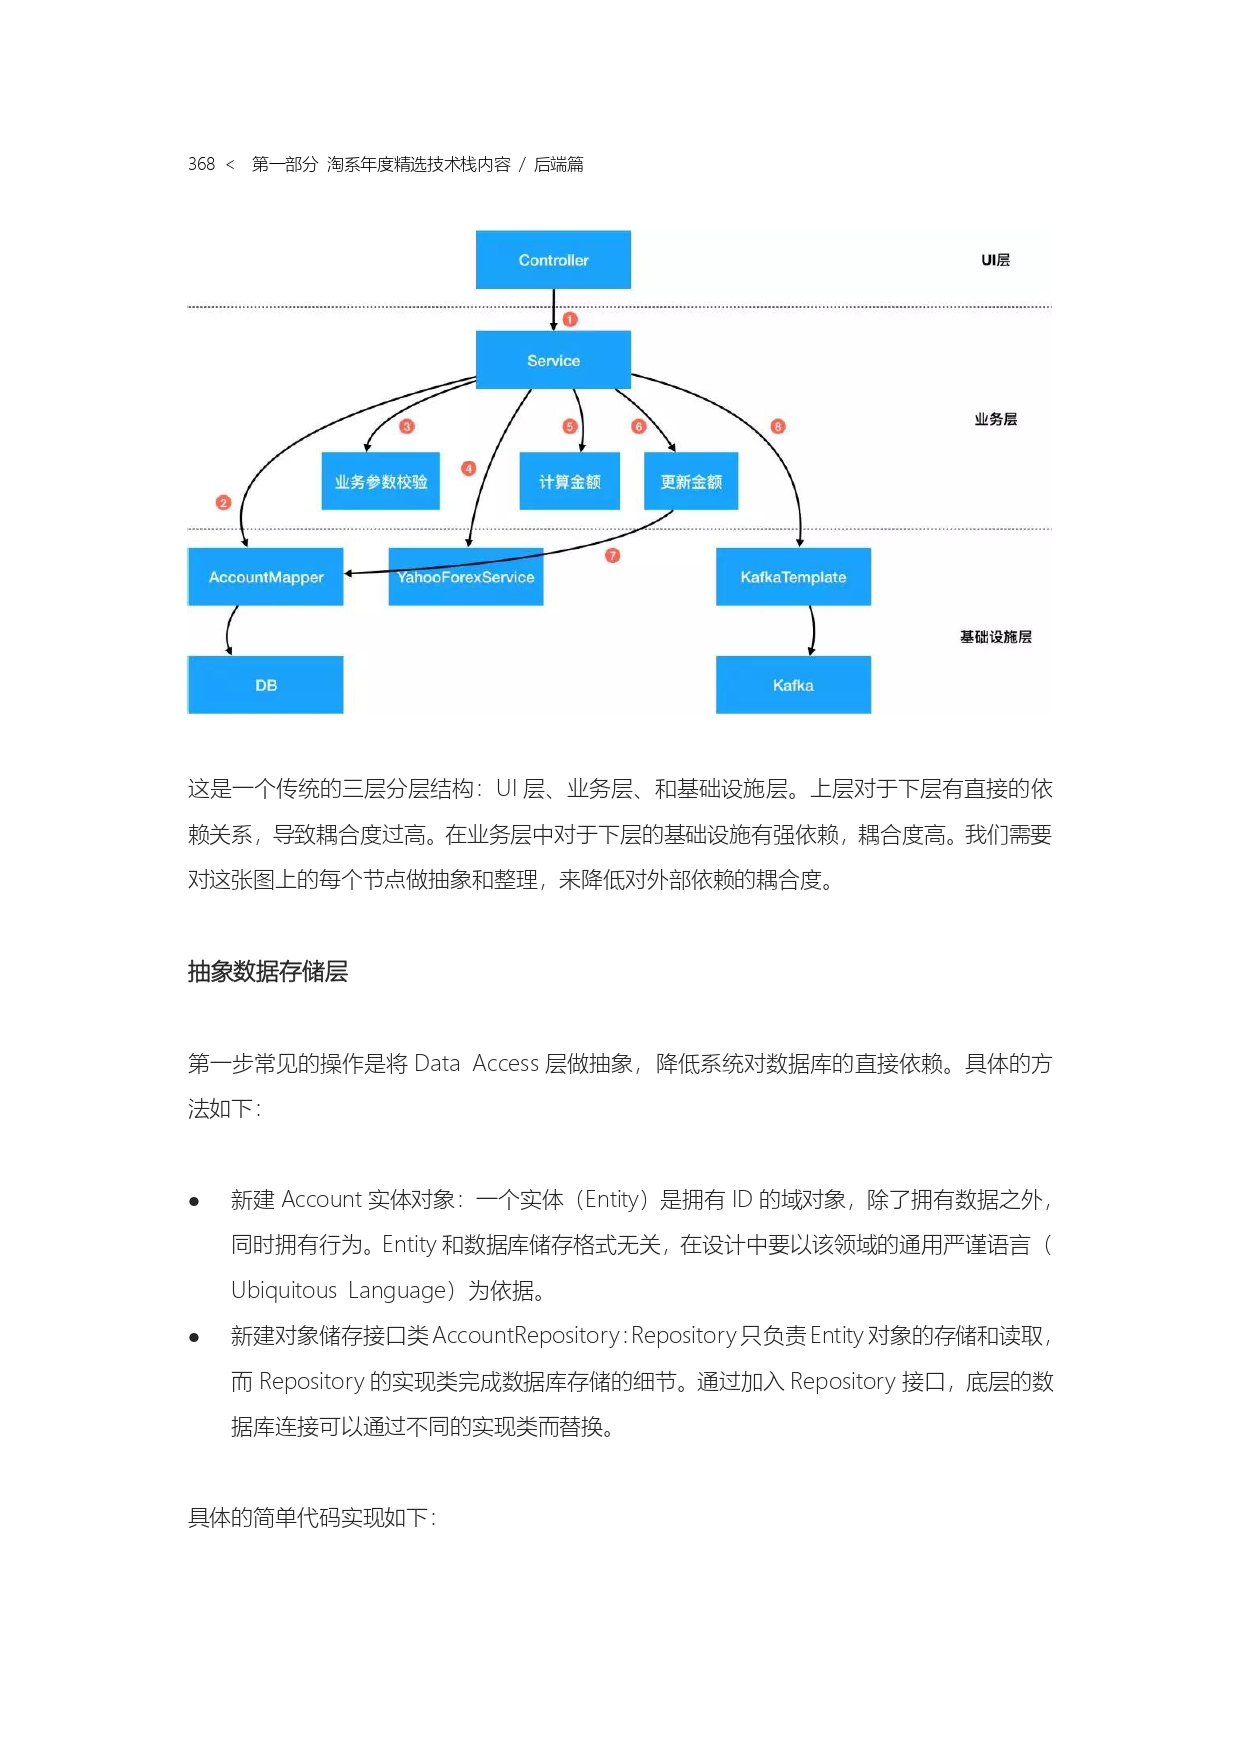 The Complete Works of Tao Technology 2020-1-570_page-0368.jpg